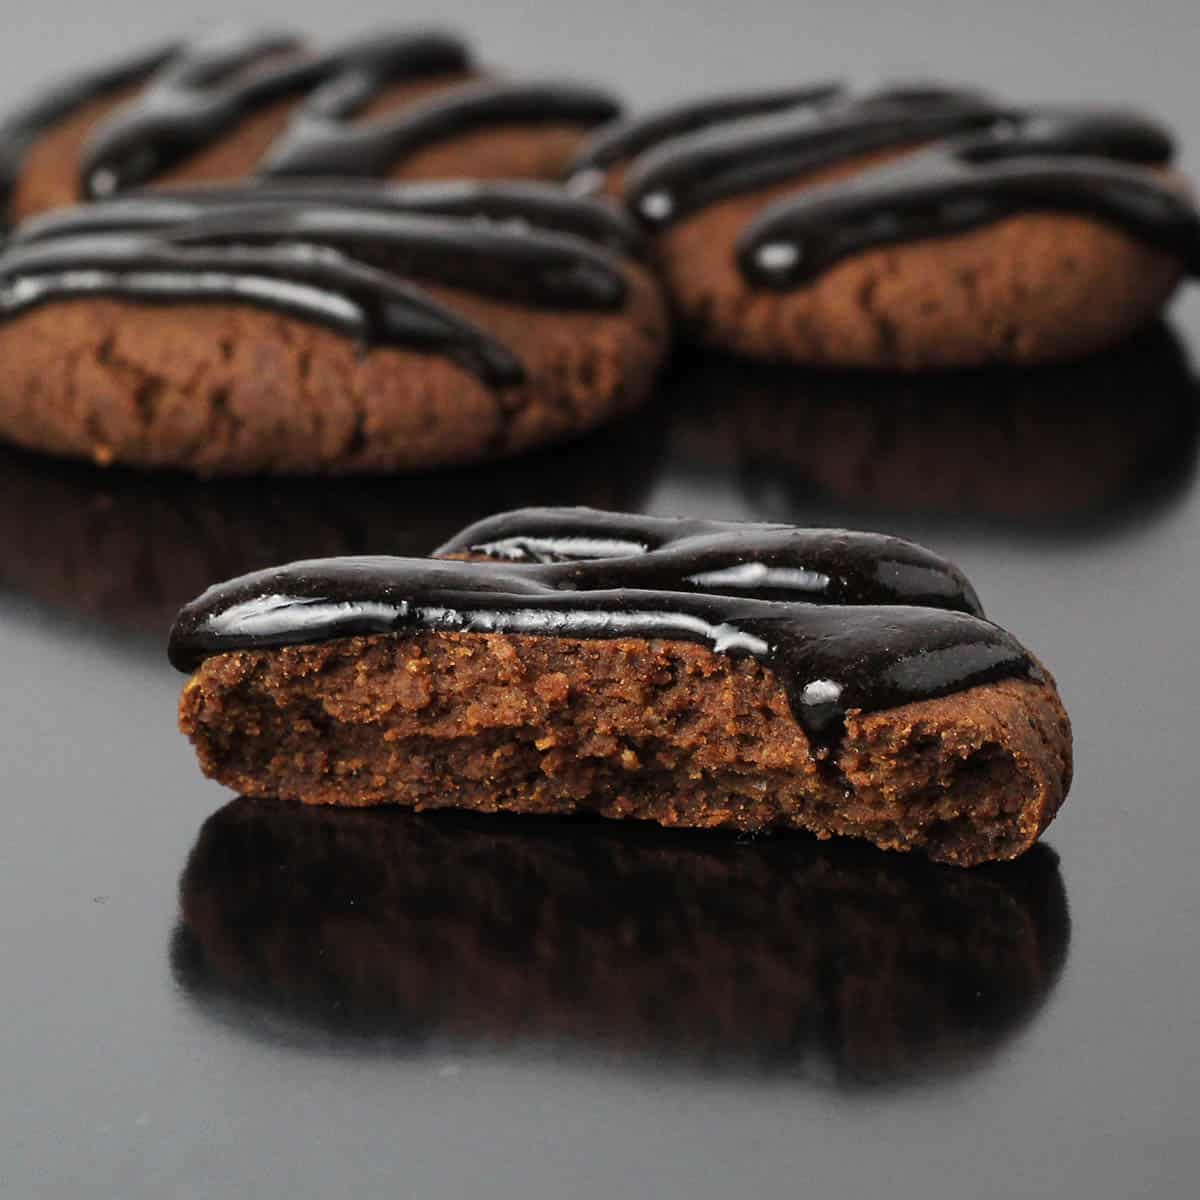 inside view of a chocolate hazelnut cookie drizzled with dark chocolate icing, with a few more cookies in the background and all on a black tray